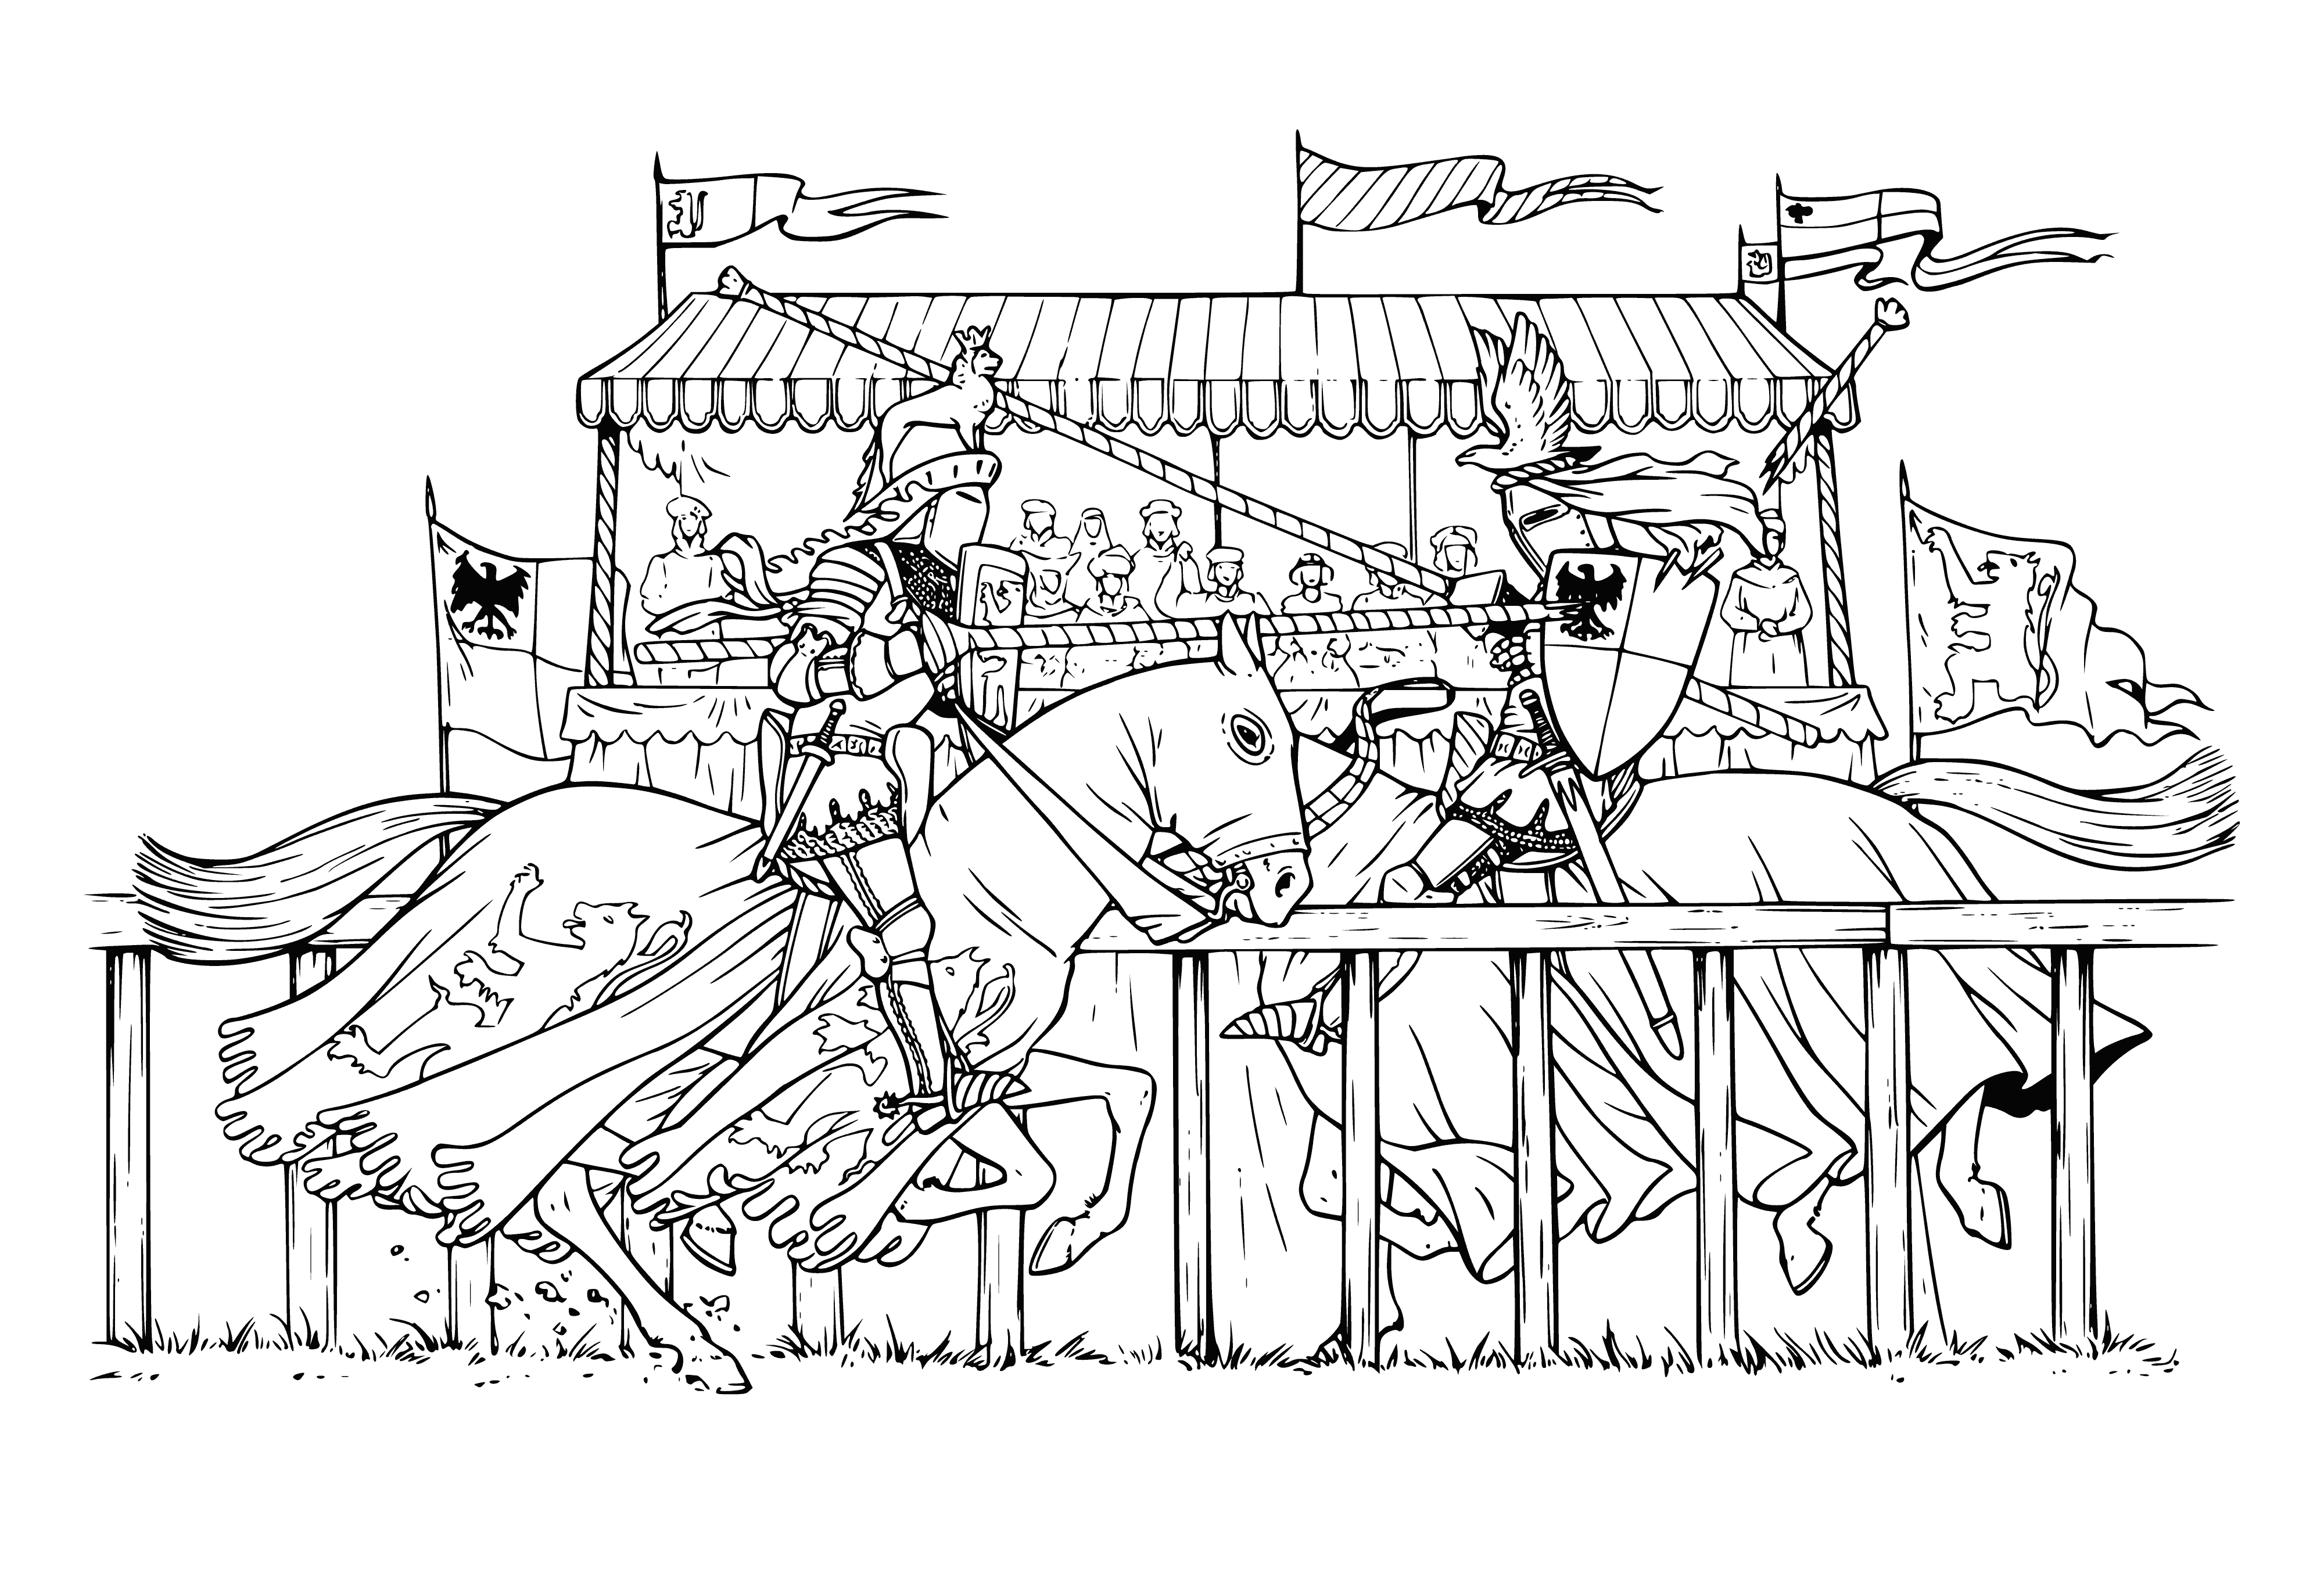 coloring page: Three armored knights riding their horses towards each other in an empty arena with a castle in the background.